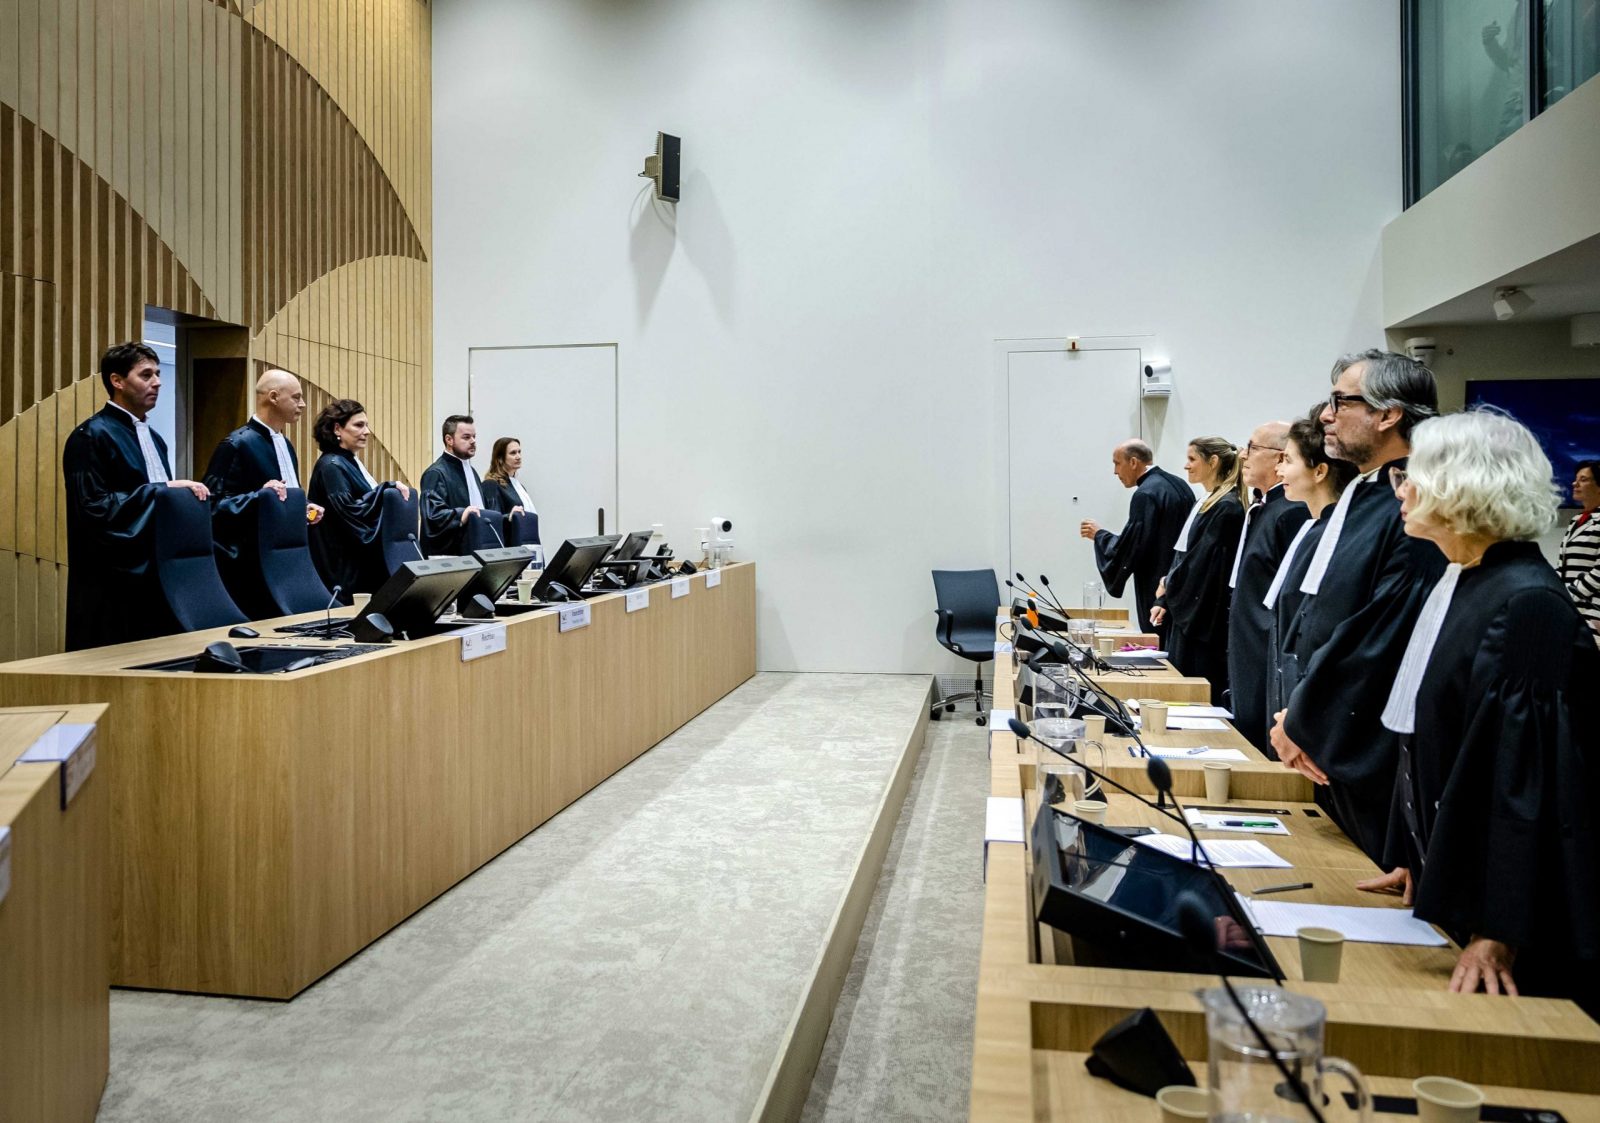 epa10310297 A court led by chairman H. Steenhuis (2-L) stands prior to the verdict at the Schiphol Judicial Complex in Badhoevedorp, Netherlands, 17 November 2022. A court in the Netherlands on 17 November is set to rule in the criminal trial over the downing of flight MH17. Four men are being prosecuted for their involvement in the crash of Malaysian Airlines passenger plane flight MH17, which was gunned down over Ukraine’s Donetsk region on 17 July 2014, killing all 298 people on board.  EPA/REMKO DE WAAL